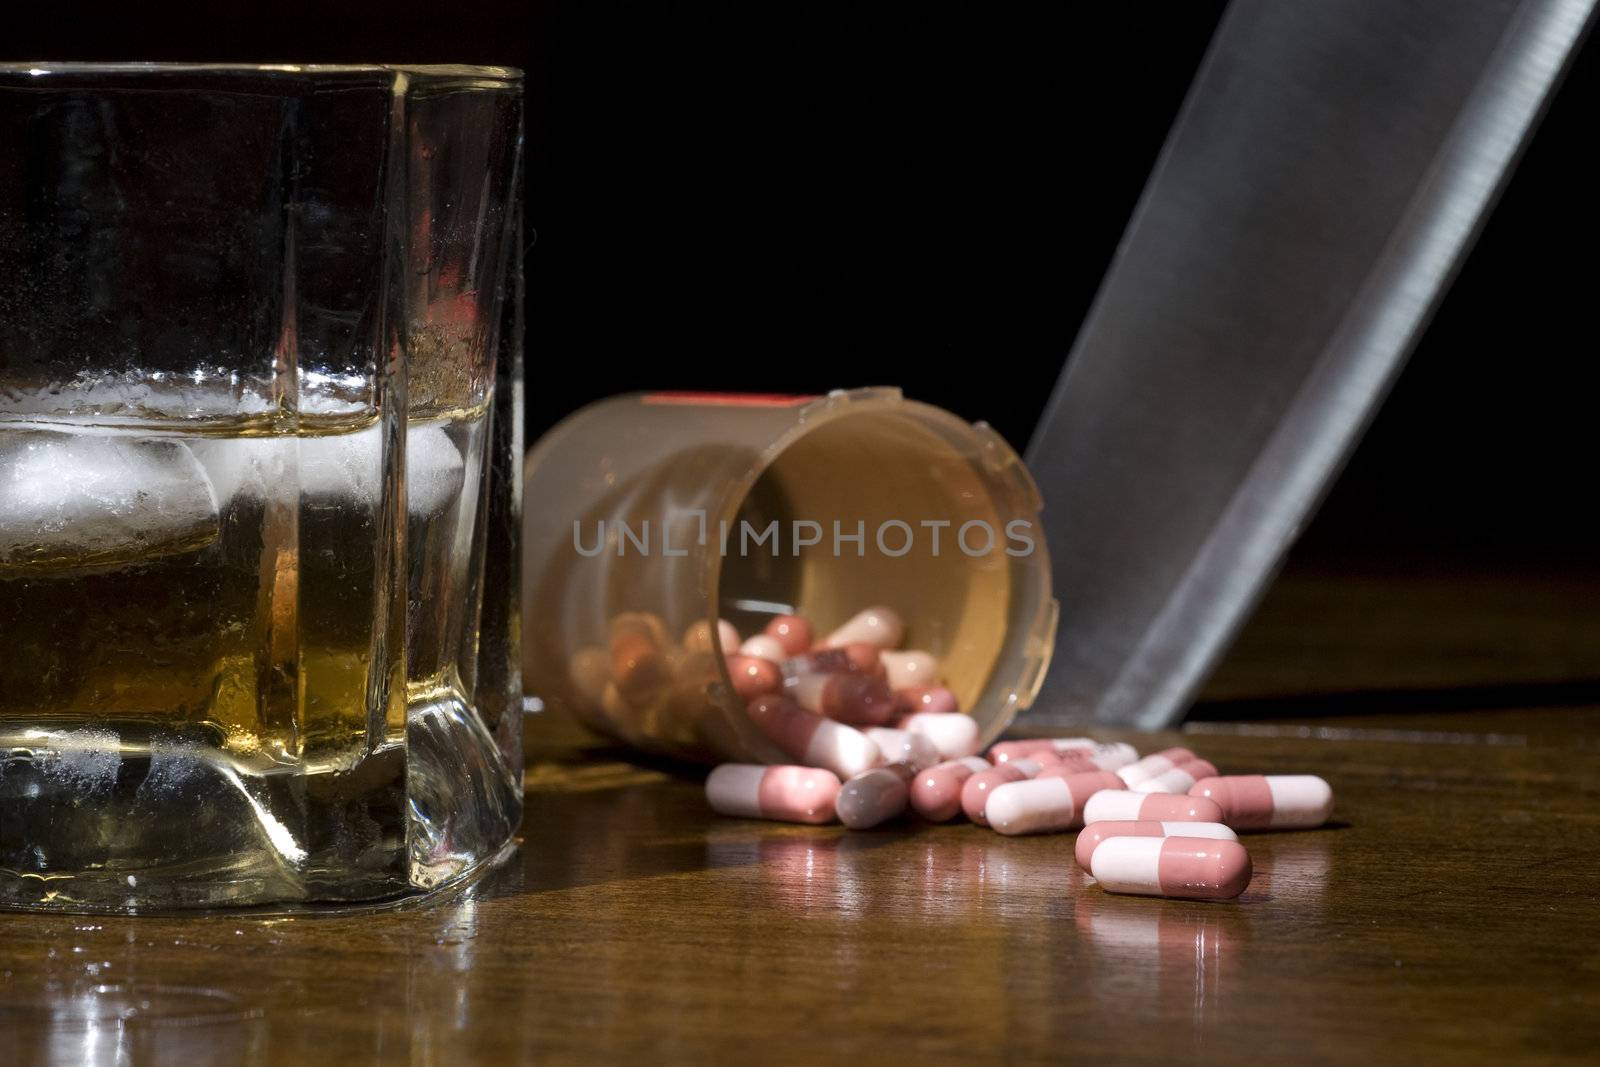 Alcohol and pills in the foreground with a knife sticking out the table in the background